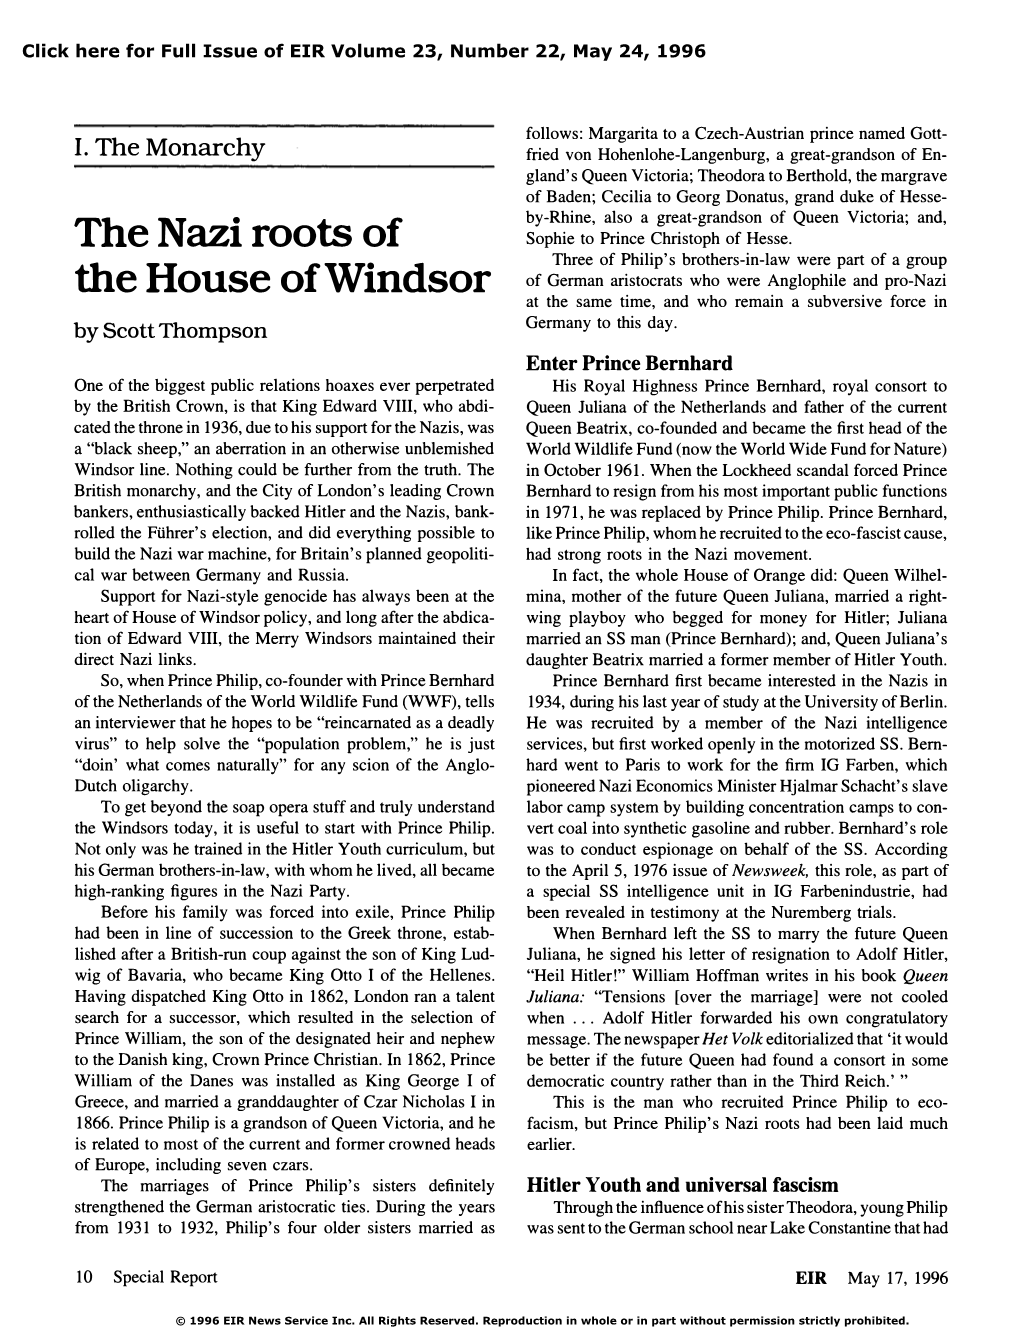 The Nazi Roots of the House of Windsor